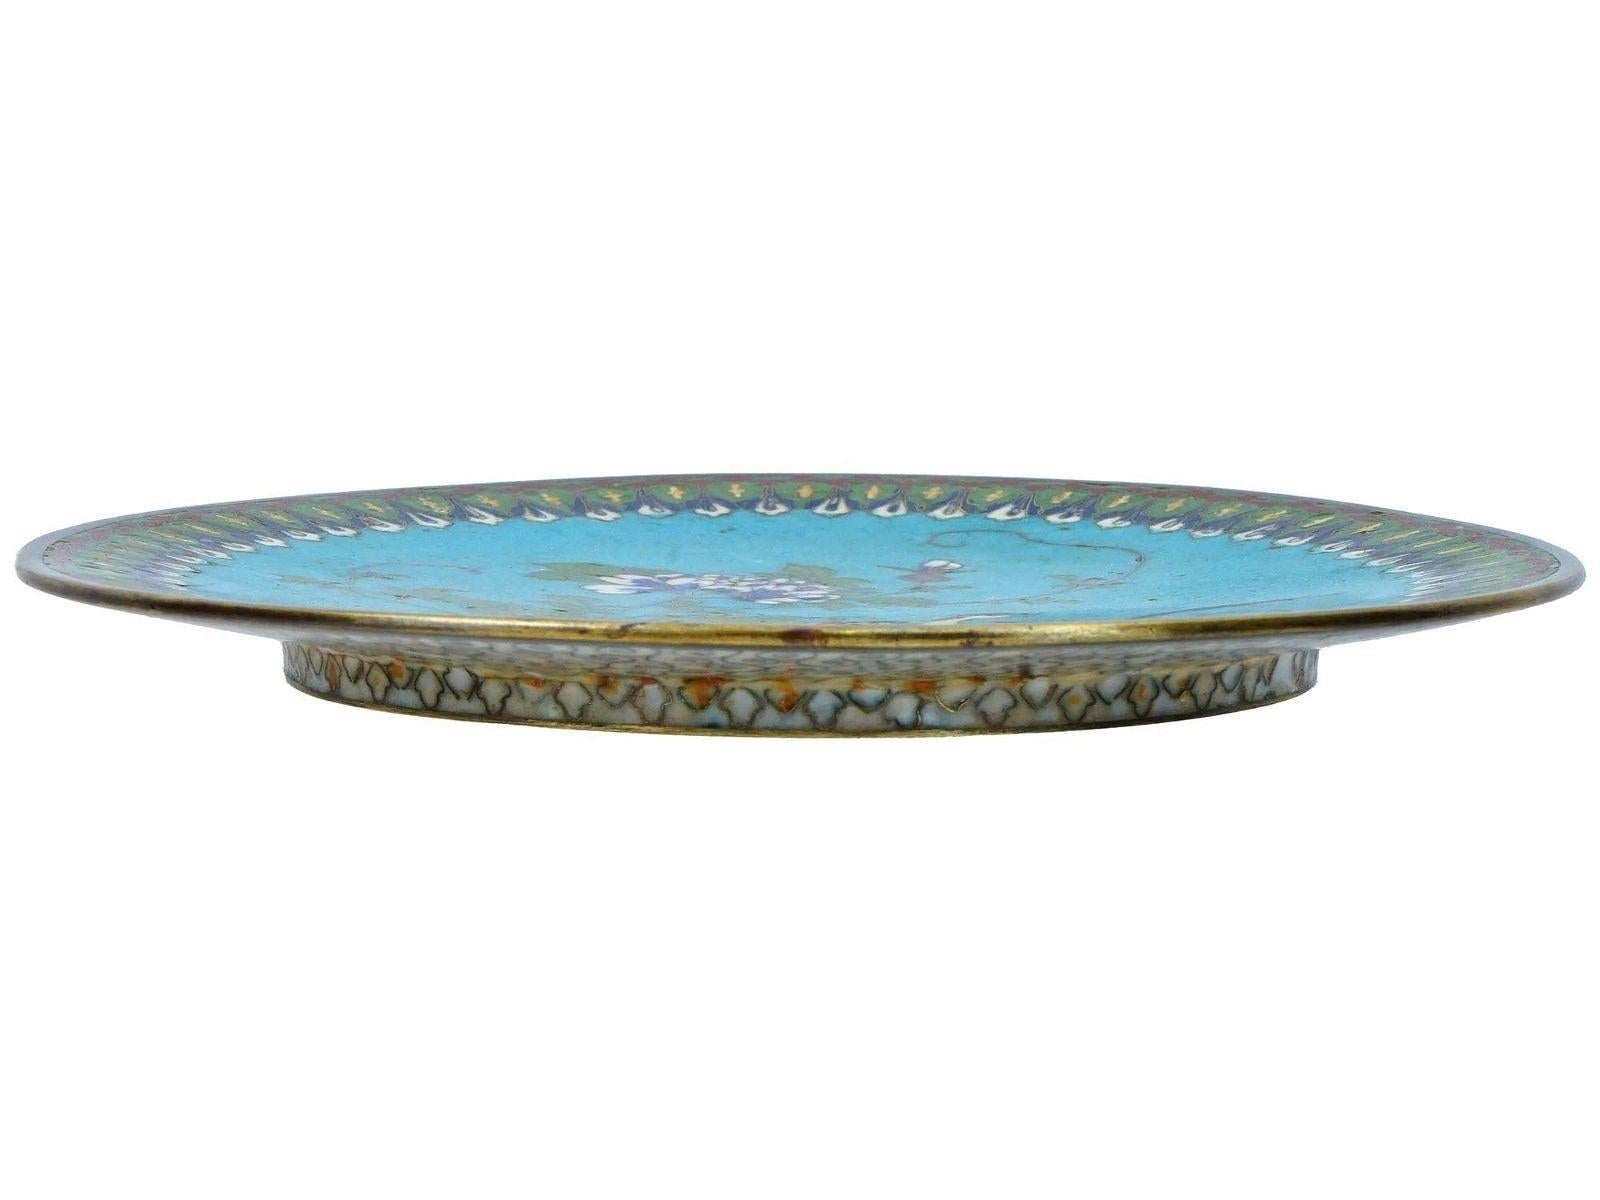 Lovely plate with fine cloisonne enamel designs depicting a peacock on light rocky ground and turquoise colored sky.